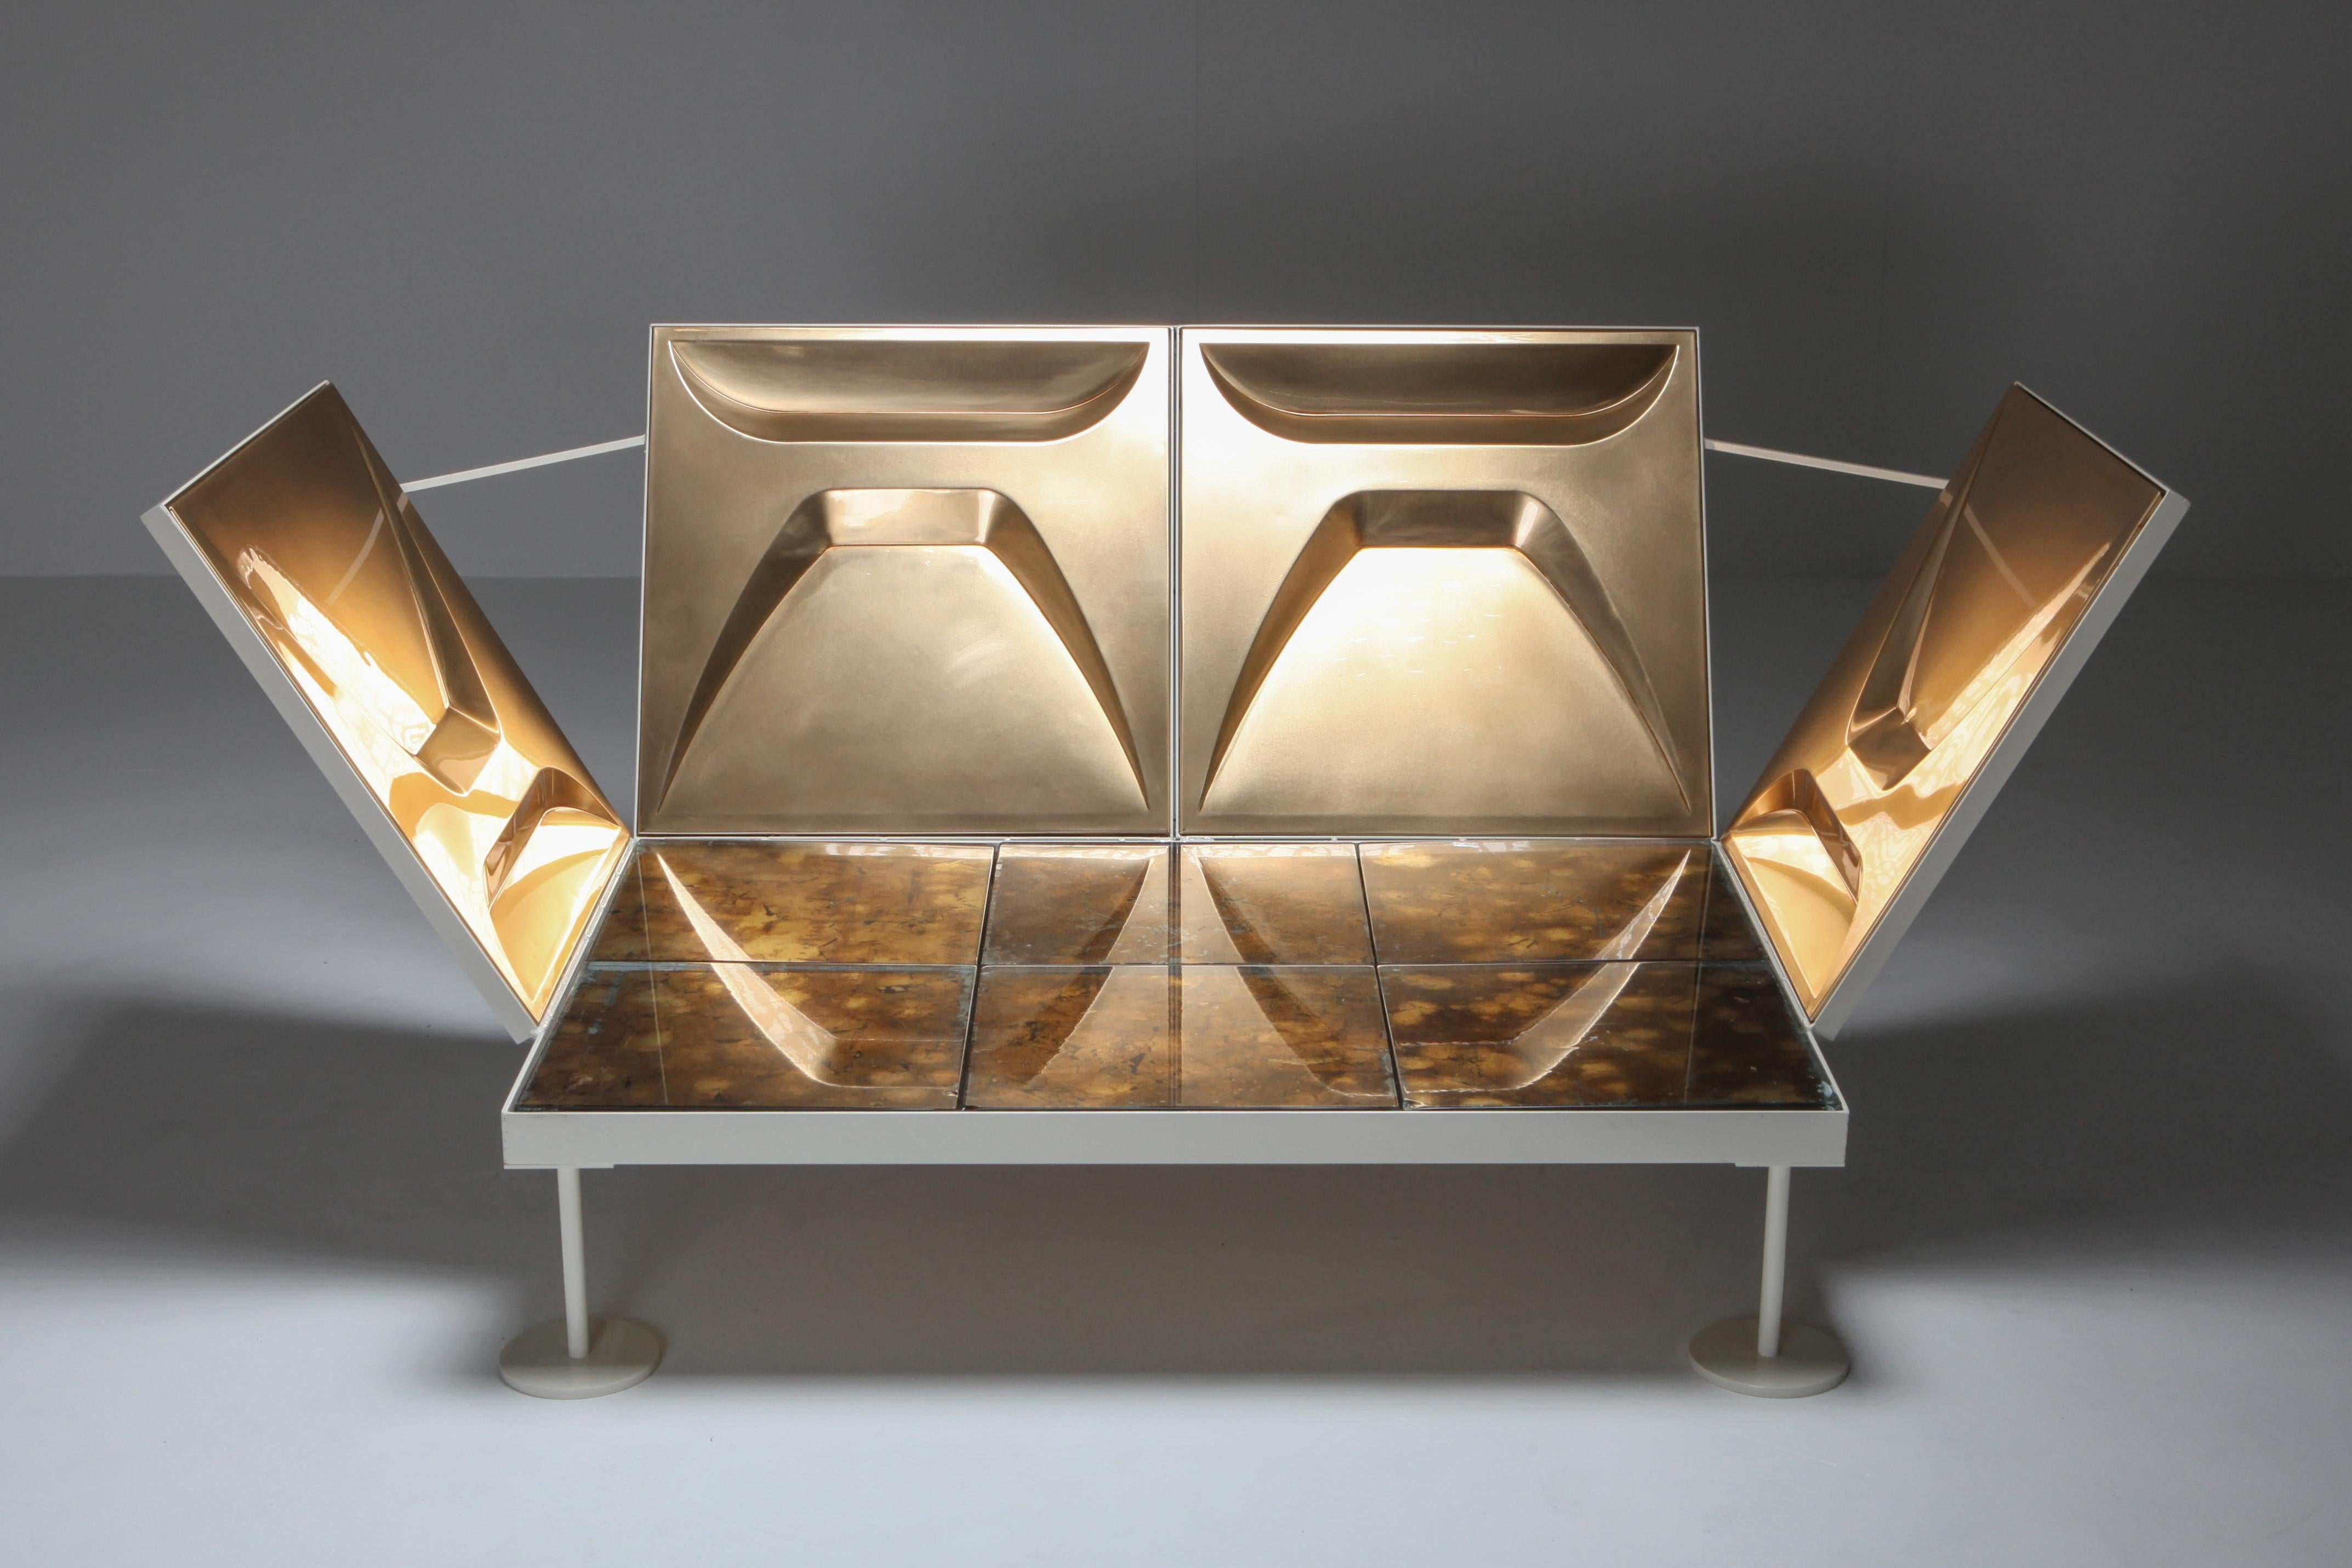 Billie Jean seat by Belgian artist Lionel Jadot, renowned for his unique assemblage of various historical elements into captivating and unique designs. 

This seat is made with 1960s’ copper sheets from a facade and gilded leaf glass tiles from a